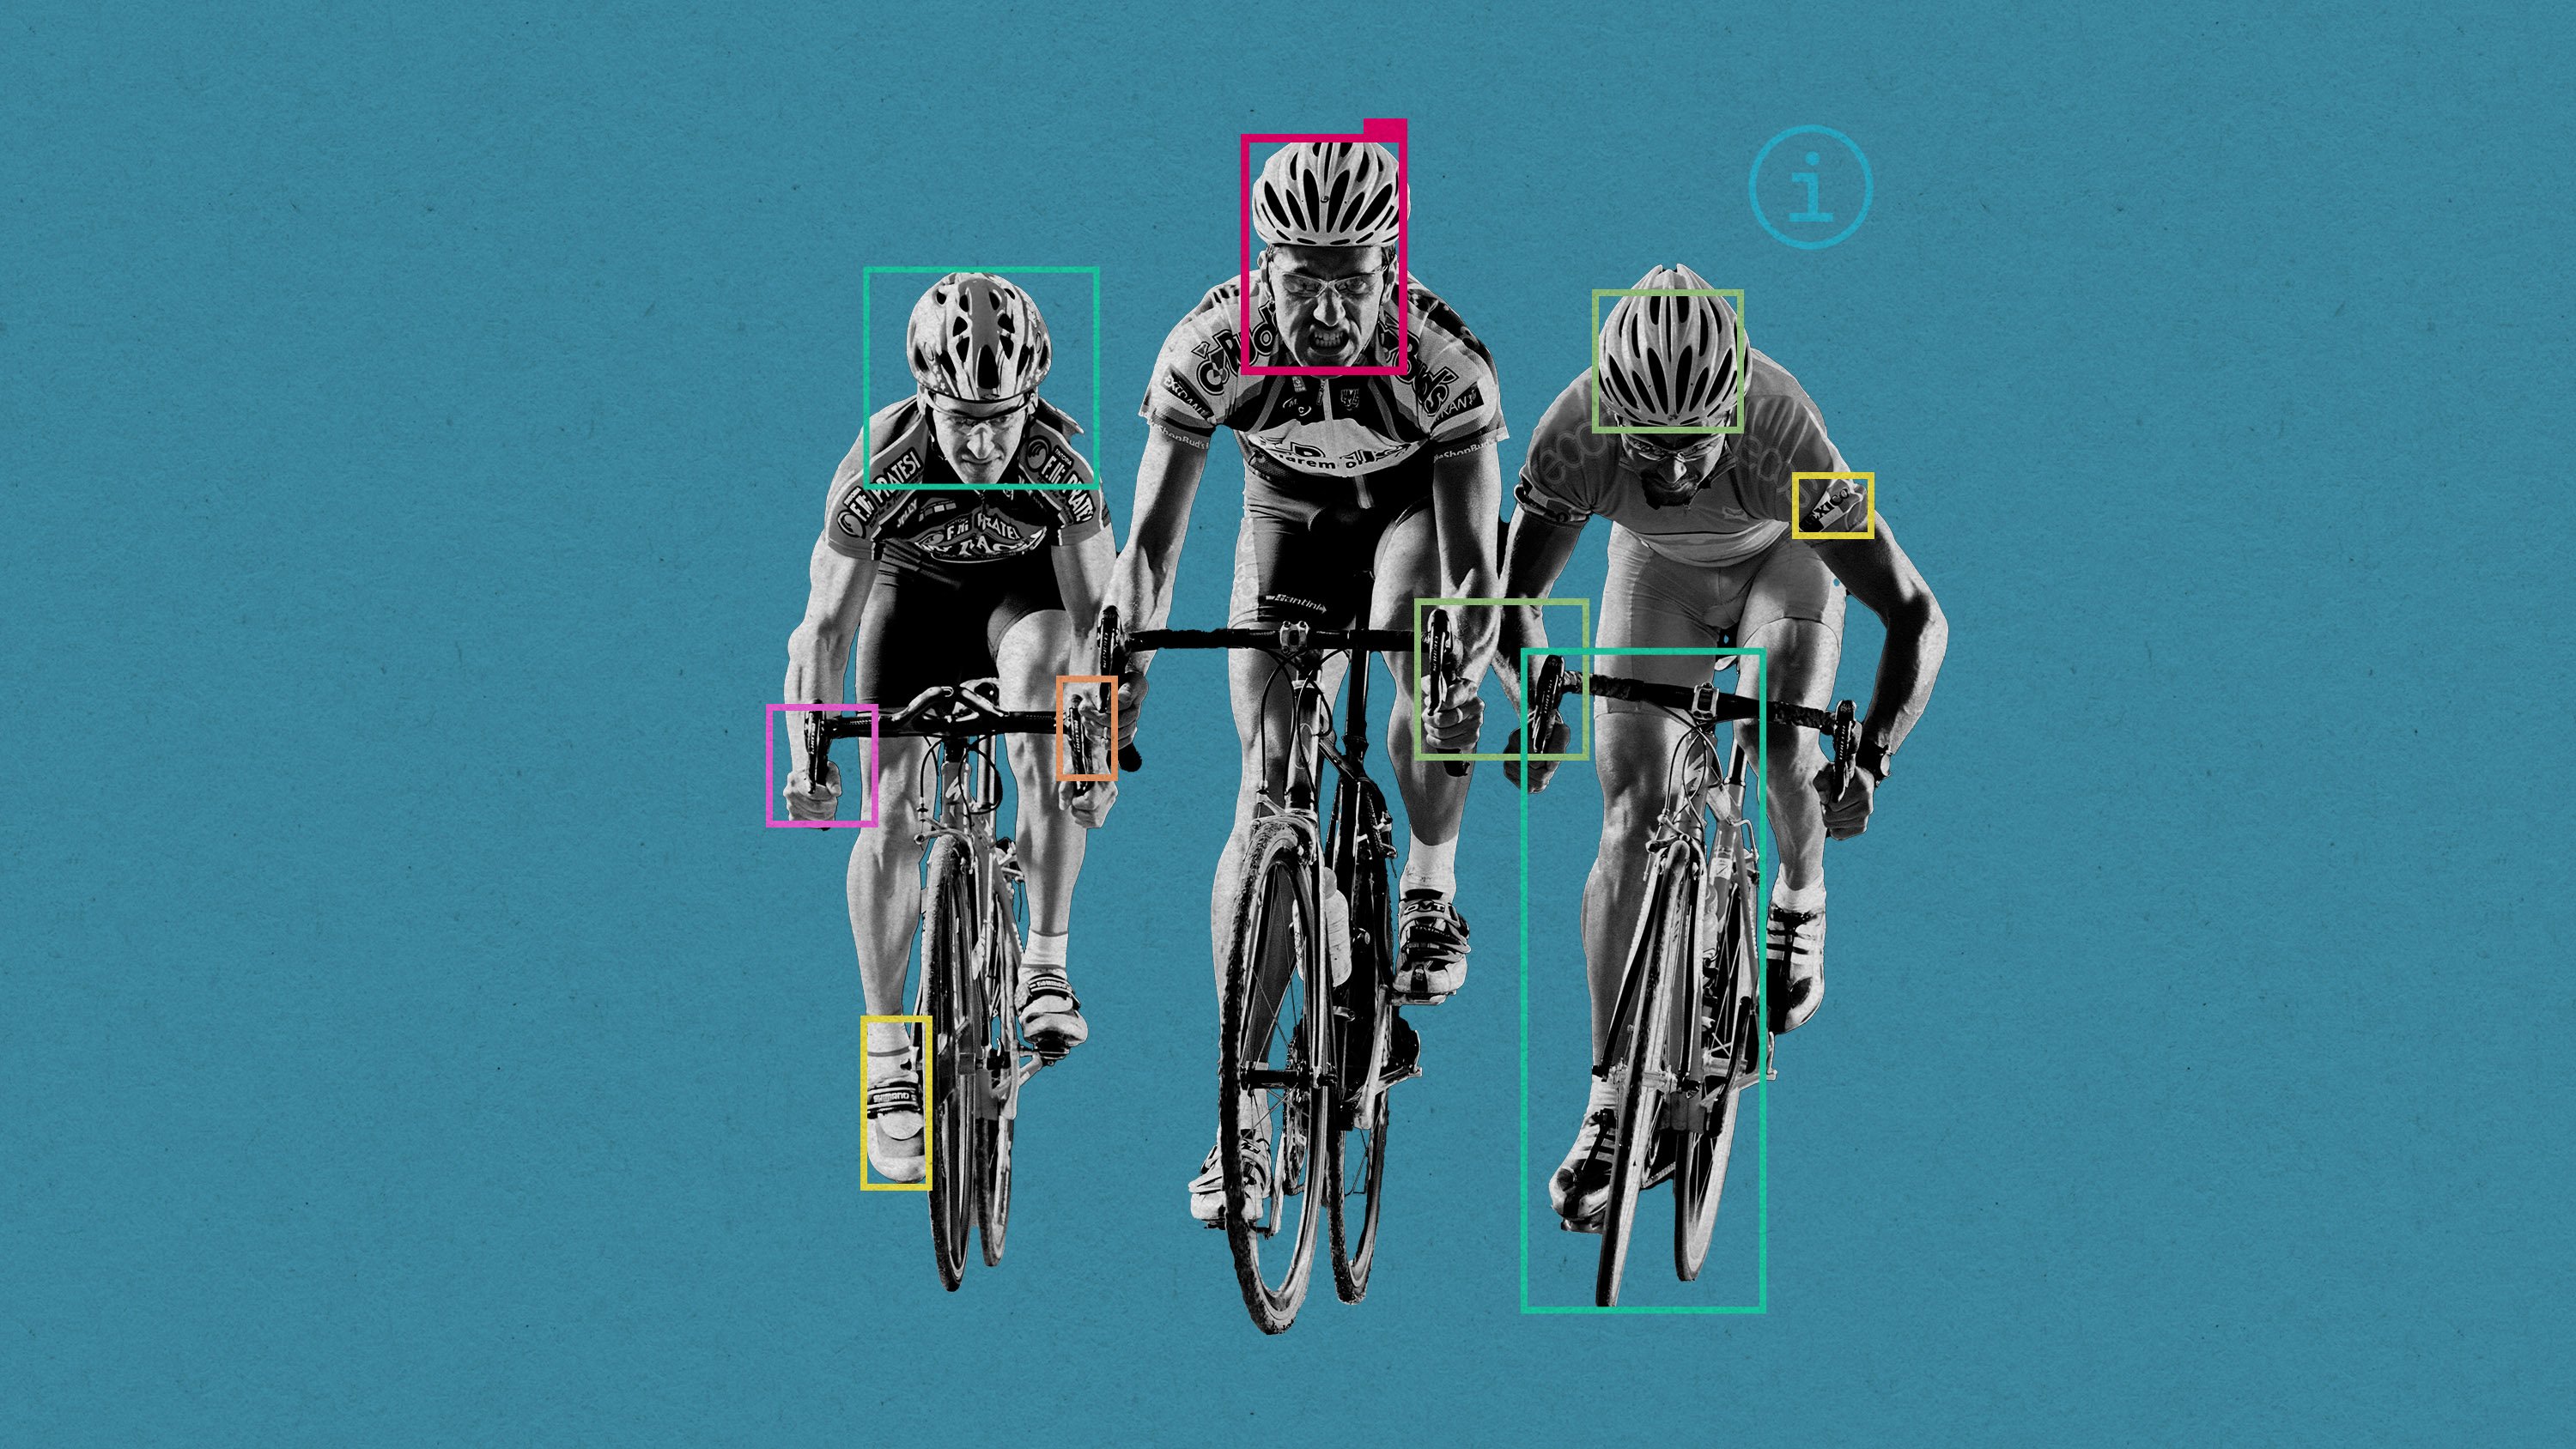 three cyclists racing with sections of the image framed by label boxes